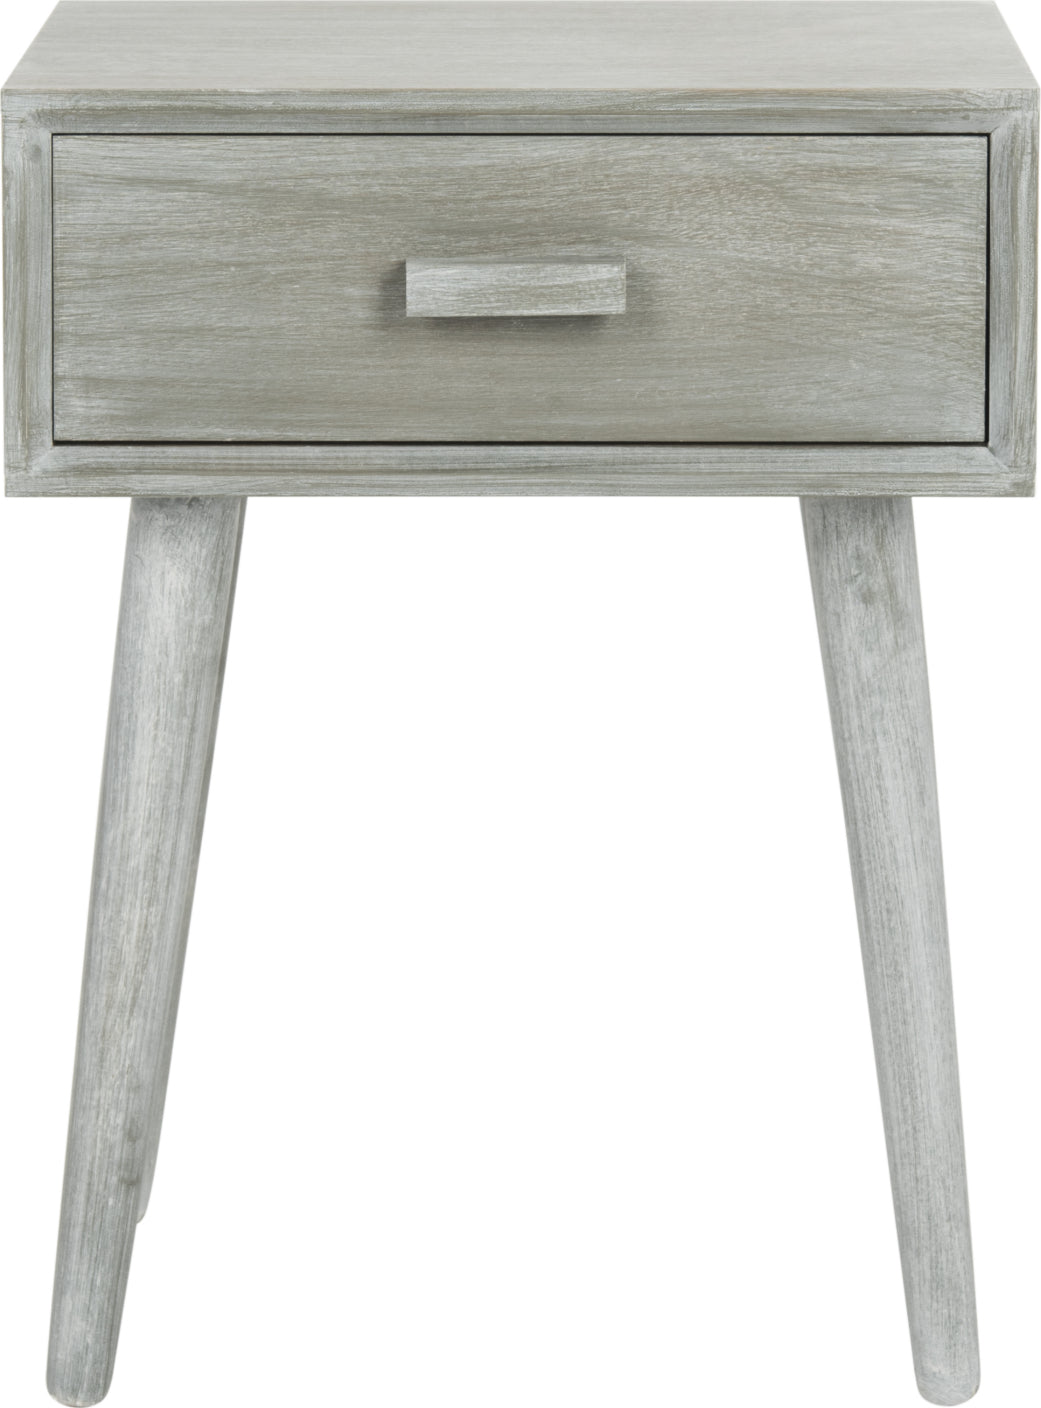 Safavieh Lyle Accent Table Slate Grey Furniture main image